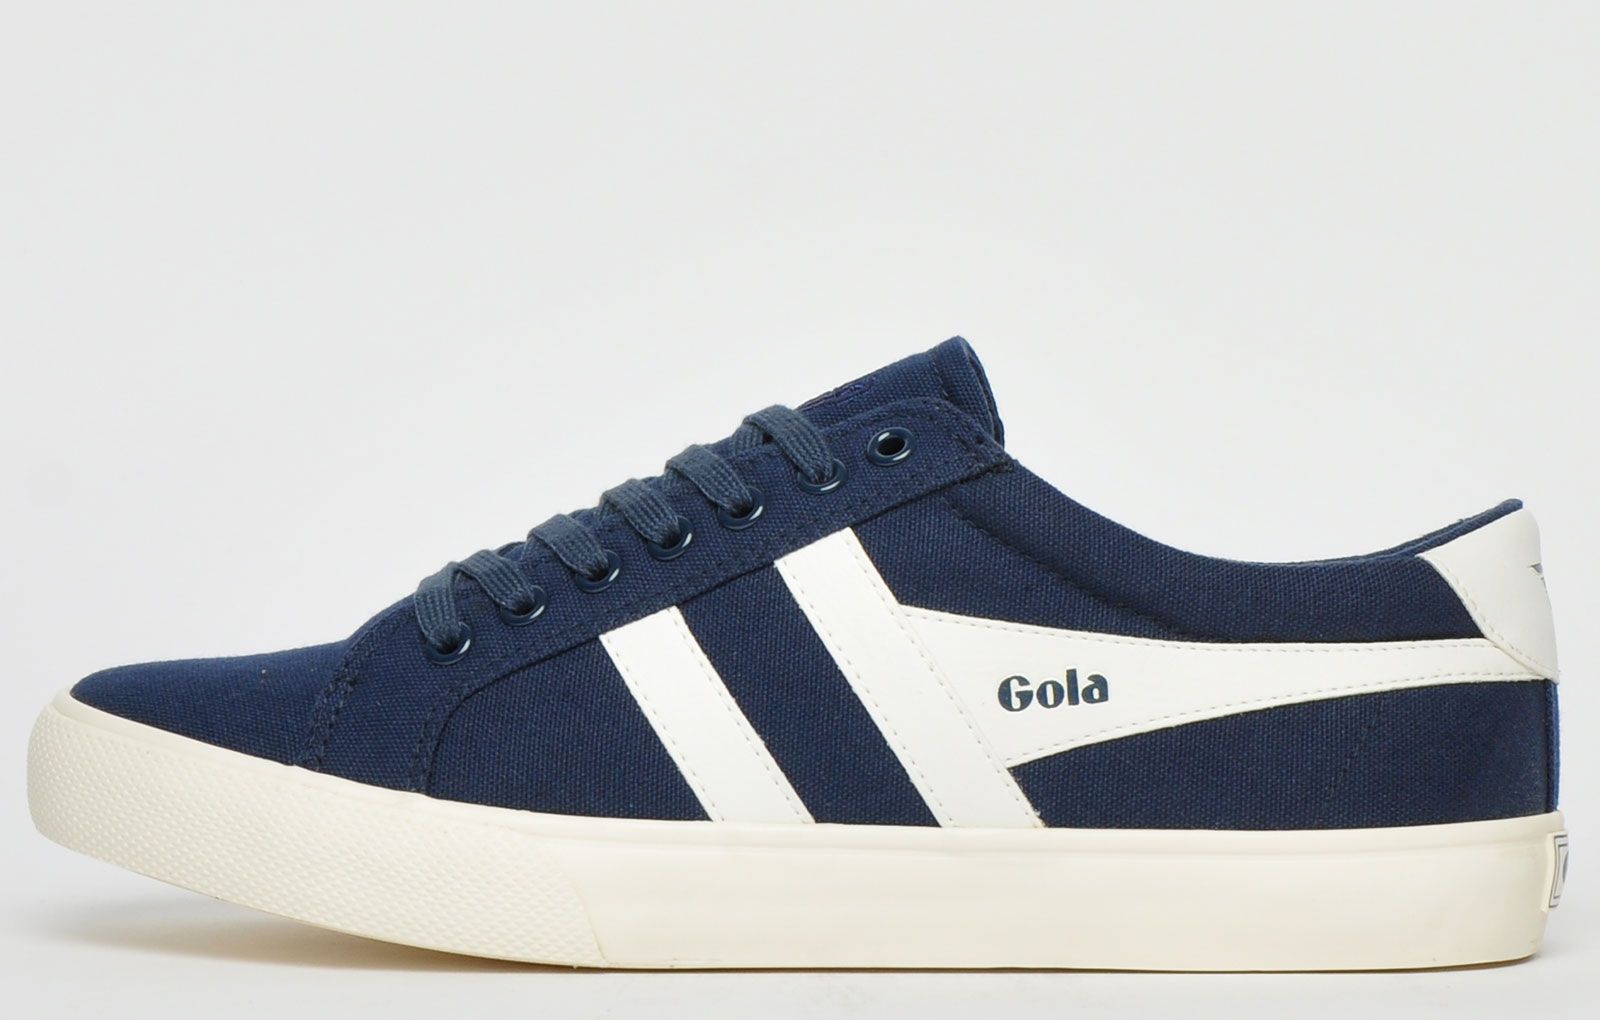 Born in Britain in 1905, Gola holds its British Heritage close to its heart. Gola has been associated with numerous high profile sporting legends over the years and was the number 1 British Sportwear brand of the 1960`s and 70`s. Gola still produces some of the most iconic trainers of today and yester years too by reaching back into its archives to deliver authentic retro styling with occasionally a flavour of modern aesthetics. Gola creates footwear for those who choose not to follow the crowd and who want to stay true to the vintage retro trainer look. <p>Delivered with on trend retro plimsol styling the Varsity from Gola Classics is an old school court inspired plimsoll with a modern twist. The quality canvas upper is contrasted with the Gola wingtip logo to the side upper with a vintage styled wrap around vulc sole unit throwing things back to the days gone by, taking this new men’s Gola sneaker to a whole new styling level. The perfect partner to jeans or shorts this season, the Gola Classics Varsity is a men’s summer wardrobe essential that will never go out of fashion and at this price they won’t be around for long</p> <p>- Strong canvas upper</p> <p>- Classic lacing system</p> <p>- Vintage style vulc outsole</p> <p>- Old school silhouette</p> <p>- Padded ankle and heel collar</p> <p>- Gola Classics branding throughout</p>